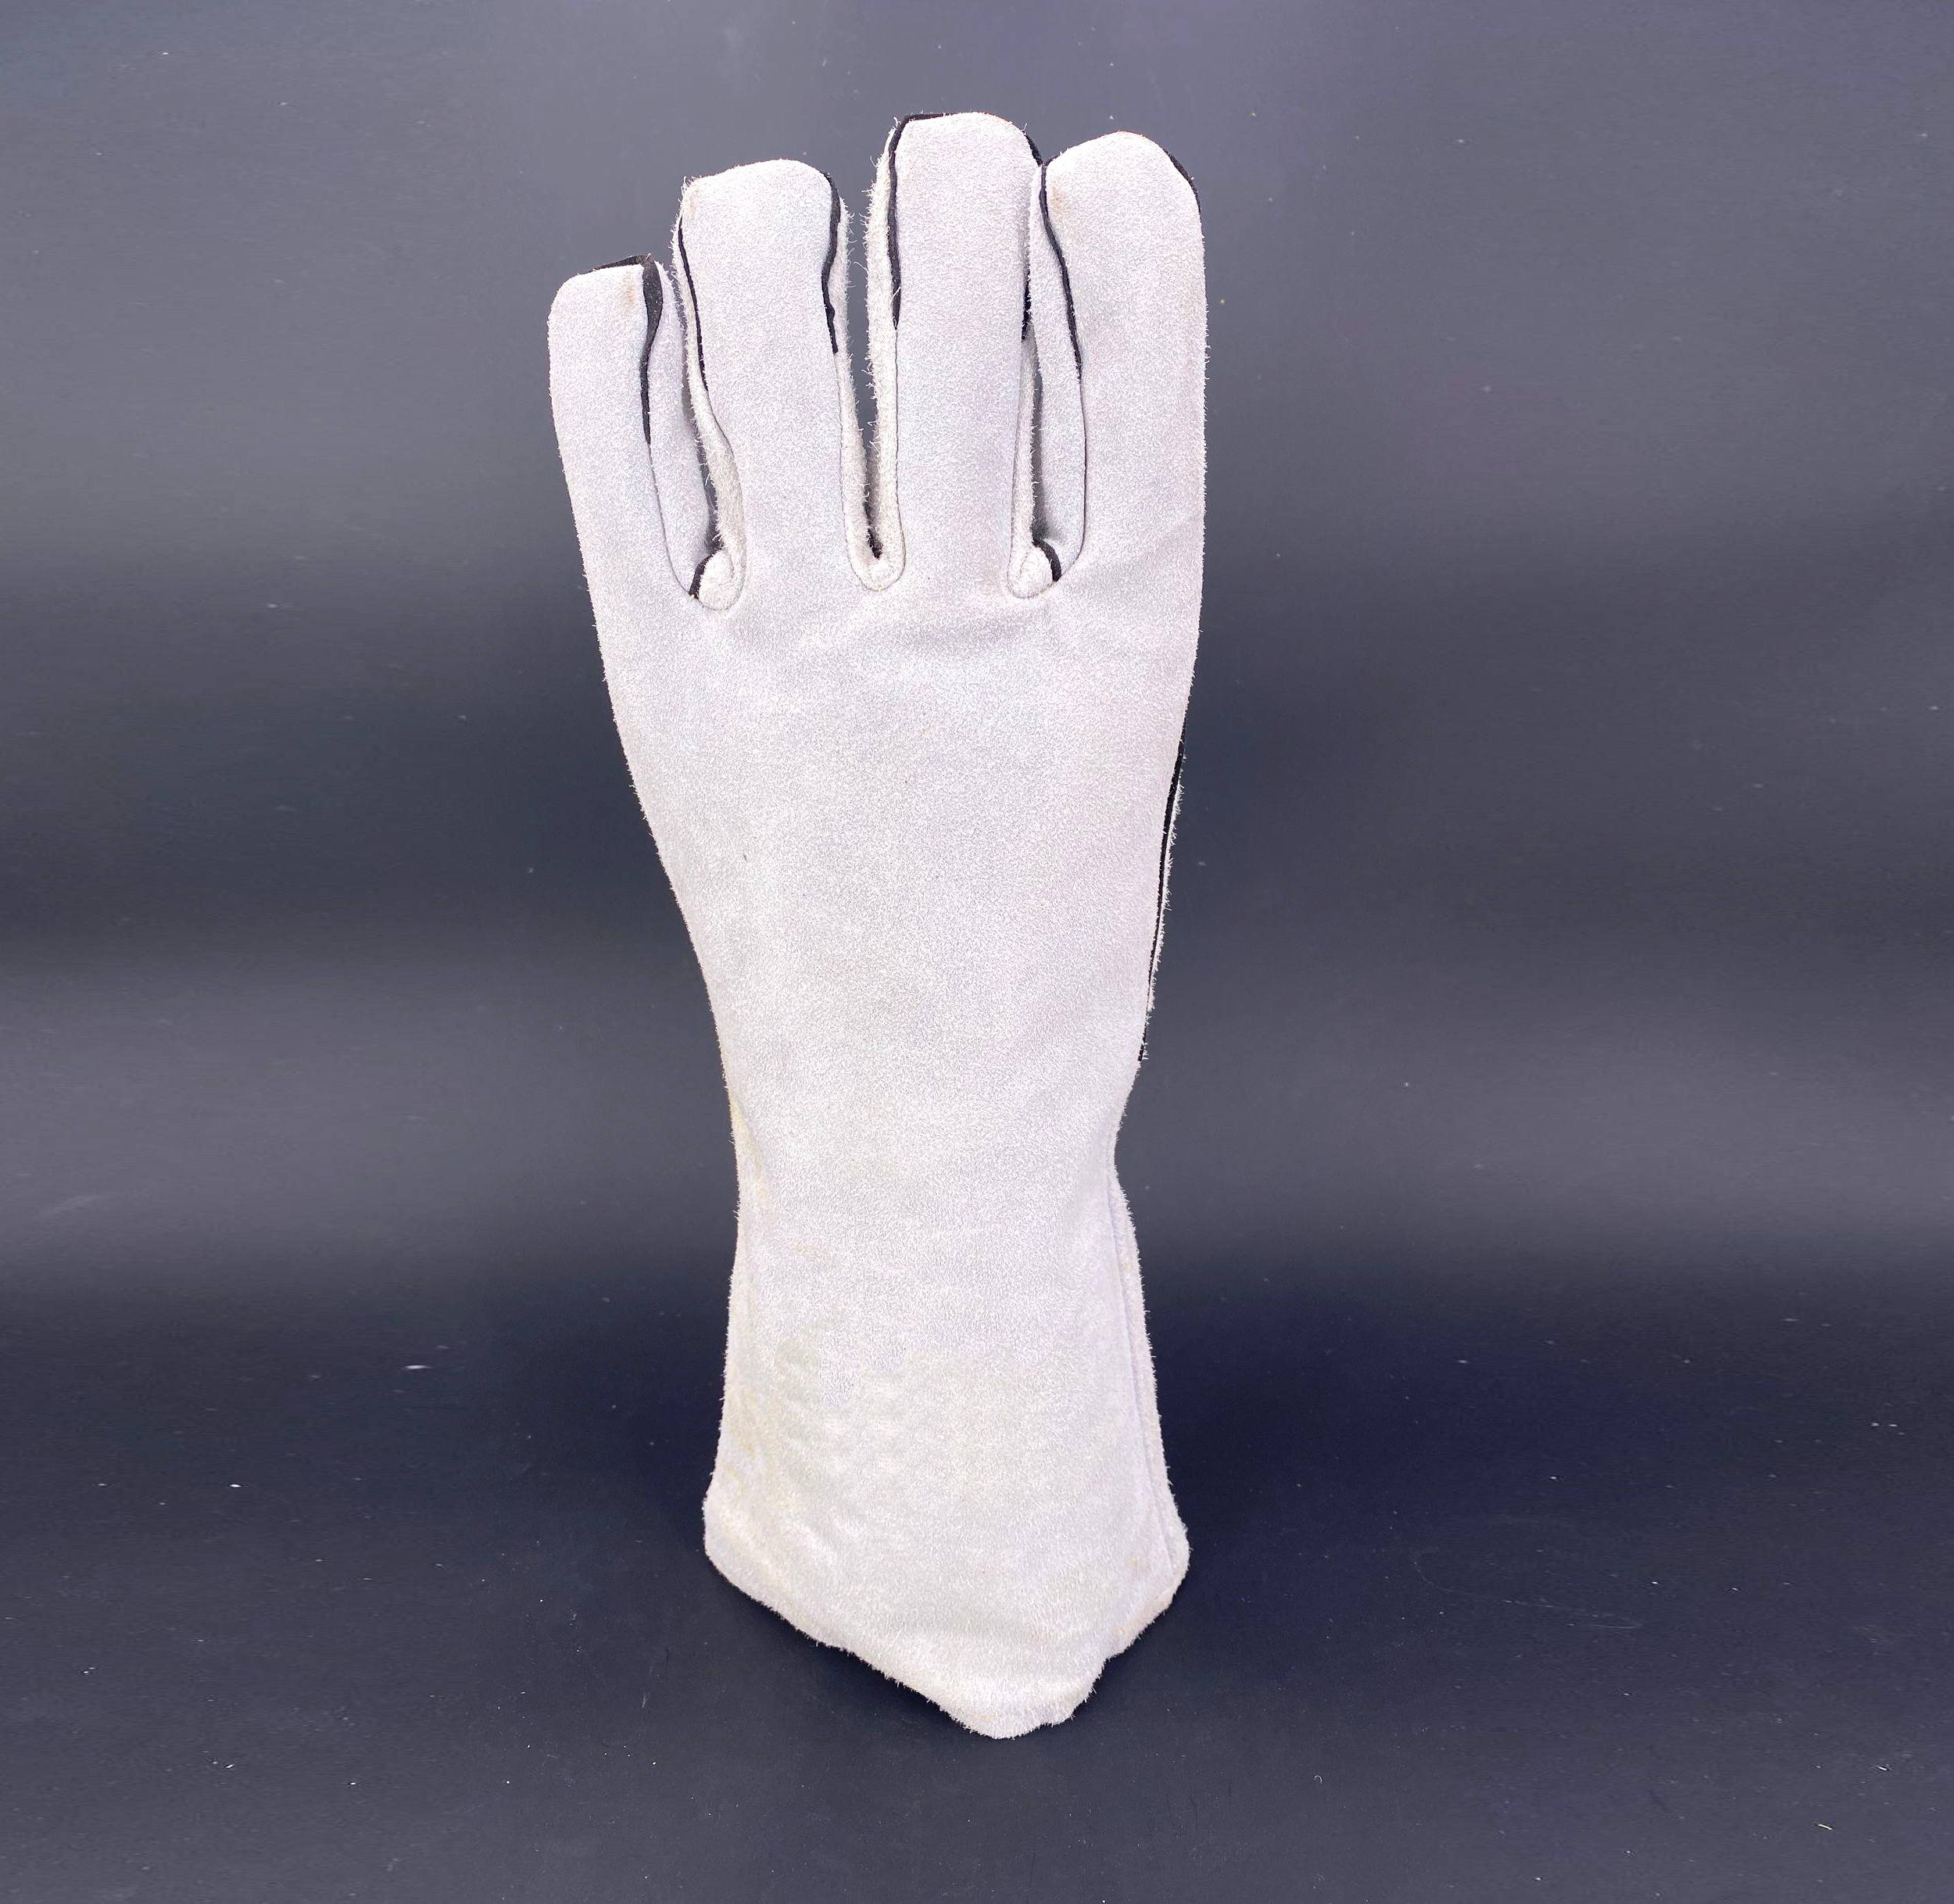 suede leather Offen used for welding protection work cut resistant safety gloves construction